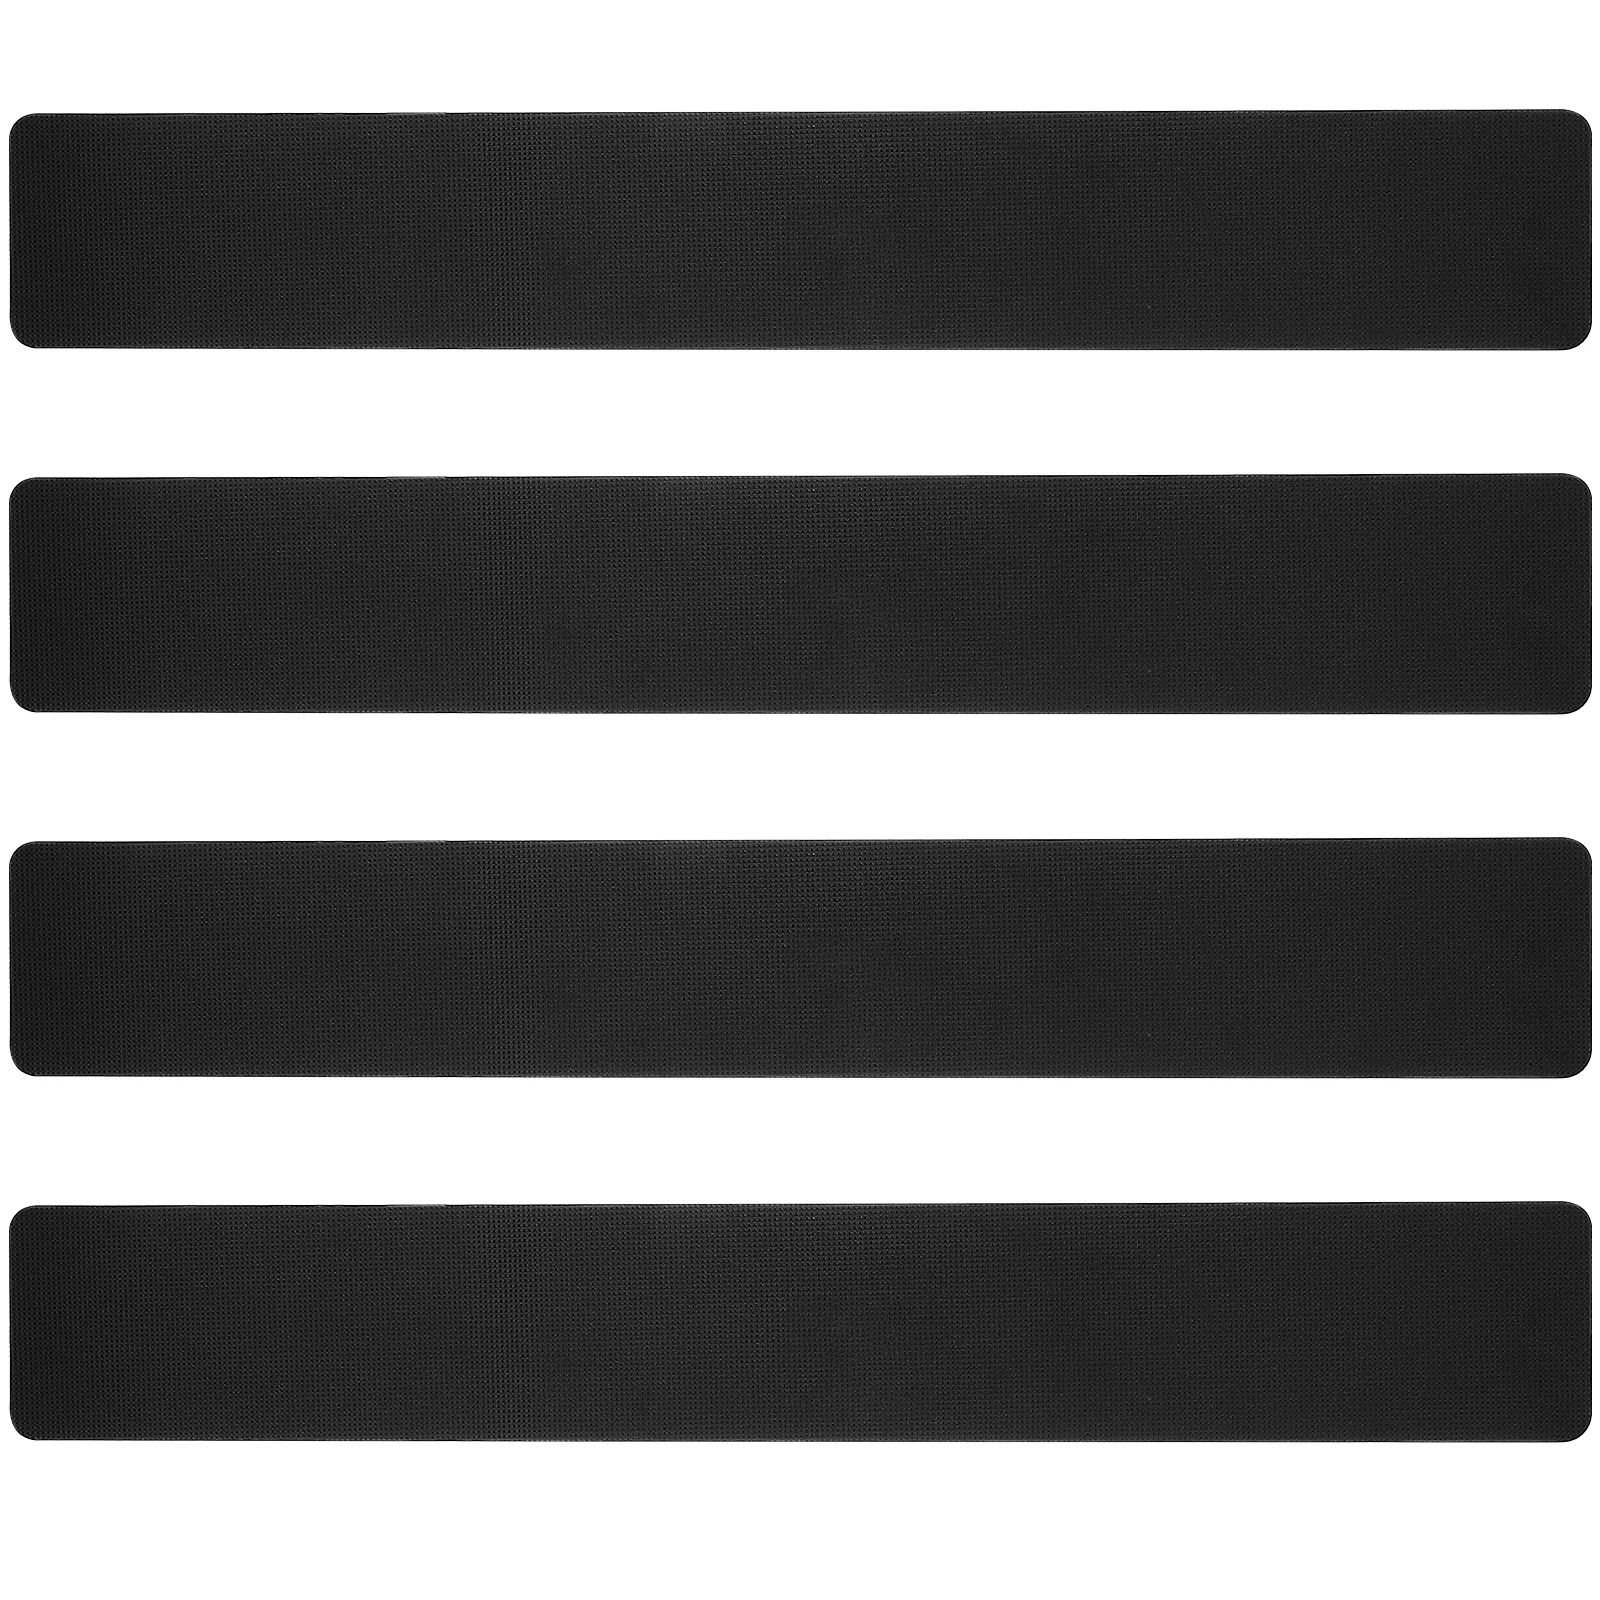 

4 Pcs Non-slip Mat Anti Skid Pads Furniture Rubber Stoppers Grippers Grid Couch Prevent Sliding Hardwood Floors